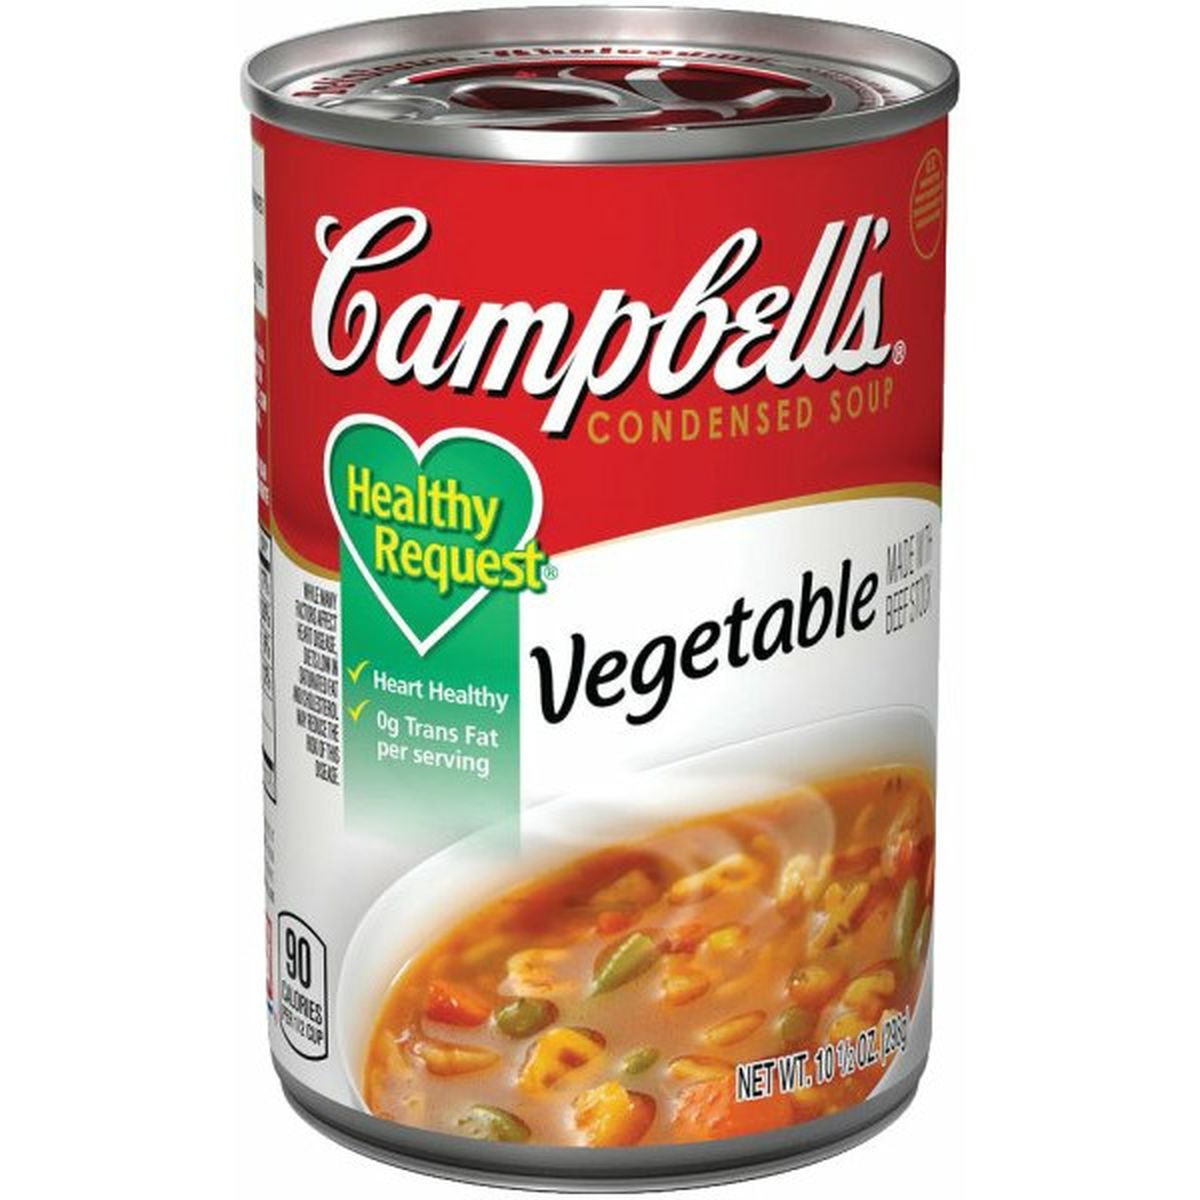 Calories in Campbell'ss Condensed Healthy RequestVegetable Soup